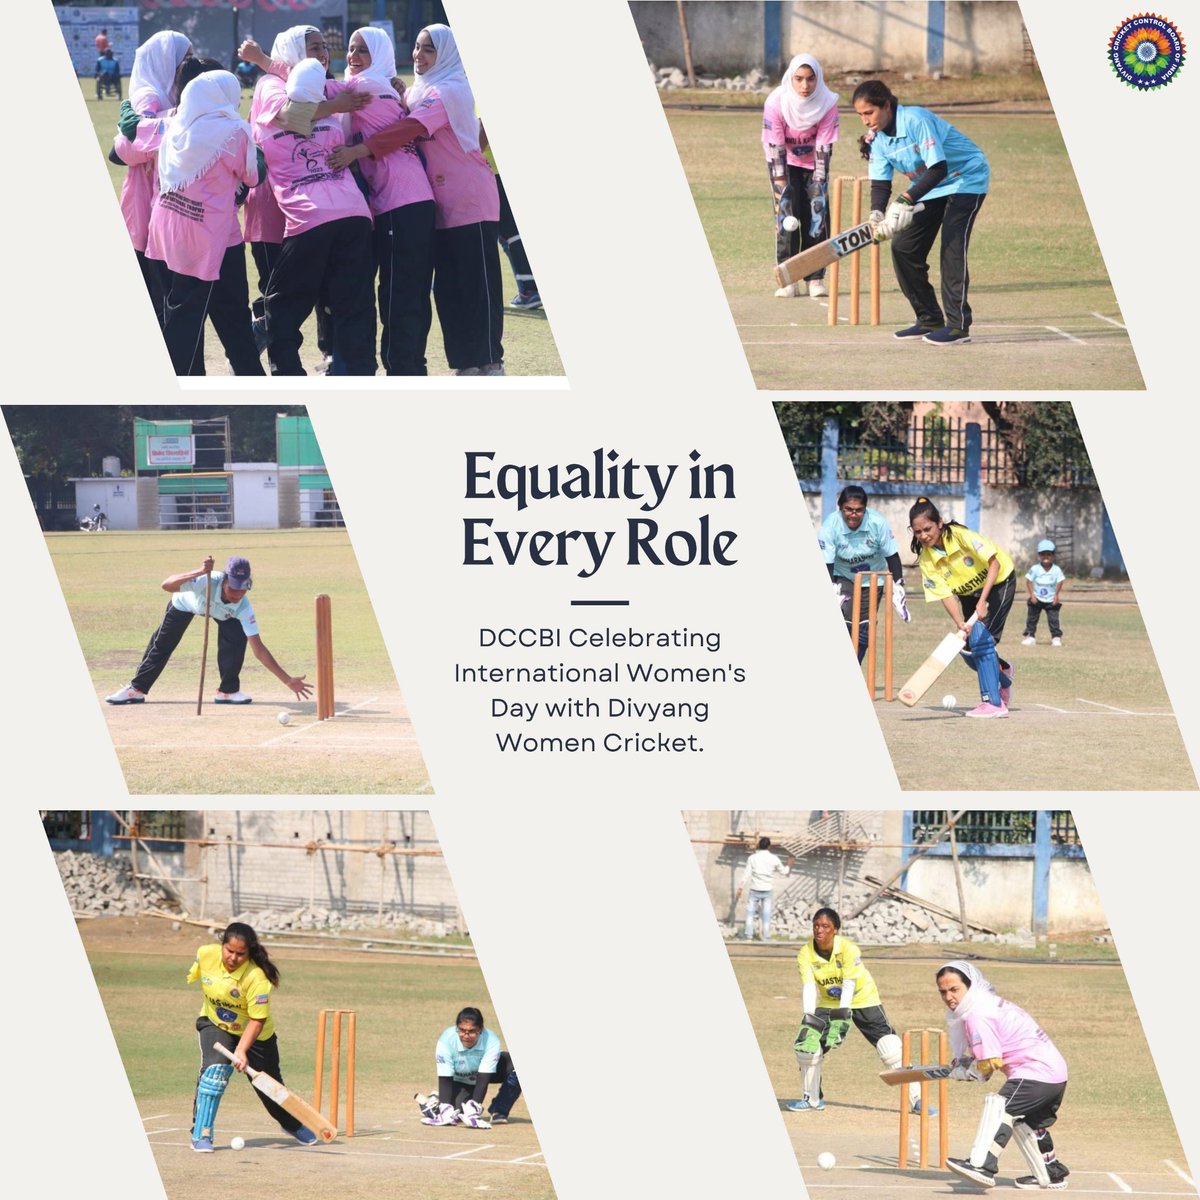 Equality in every role! DCCBI Celebrating International Women's Day with Divyang Women Cricket. #happyinternationalwomensday #internationalwomensday . #DCCBI #wheelchaircricket #wheelchaircricketindia #divyangcricket #disabilitycricket #cricket #CricketForAll #InclusiveCricket